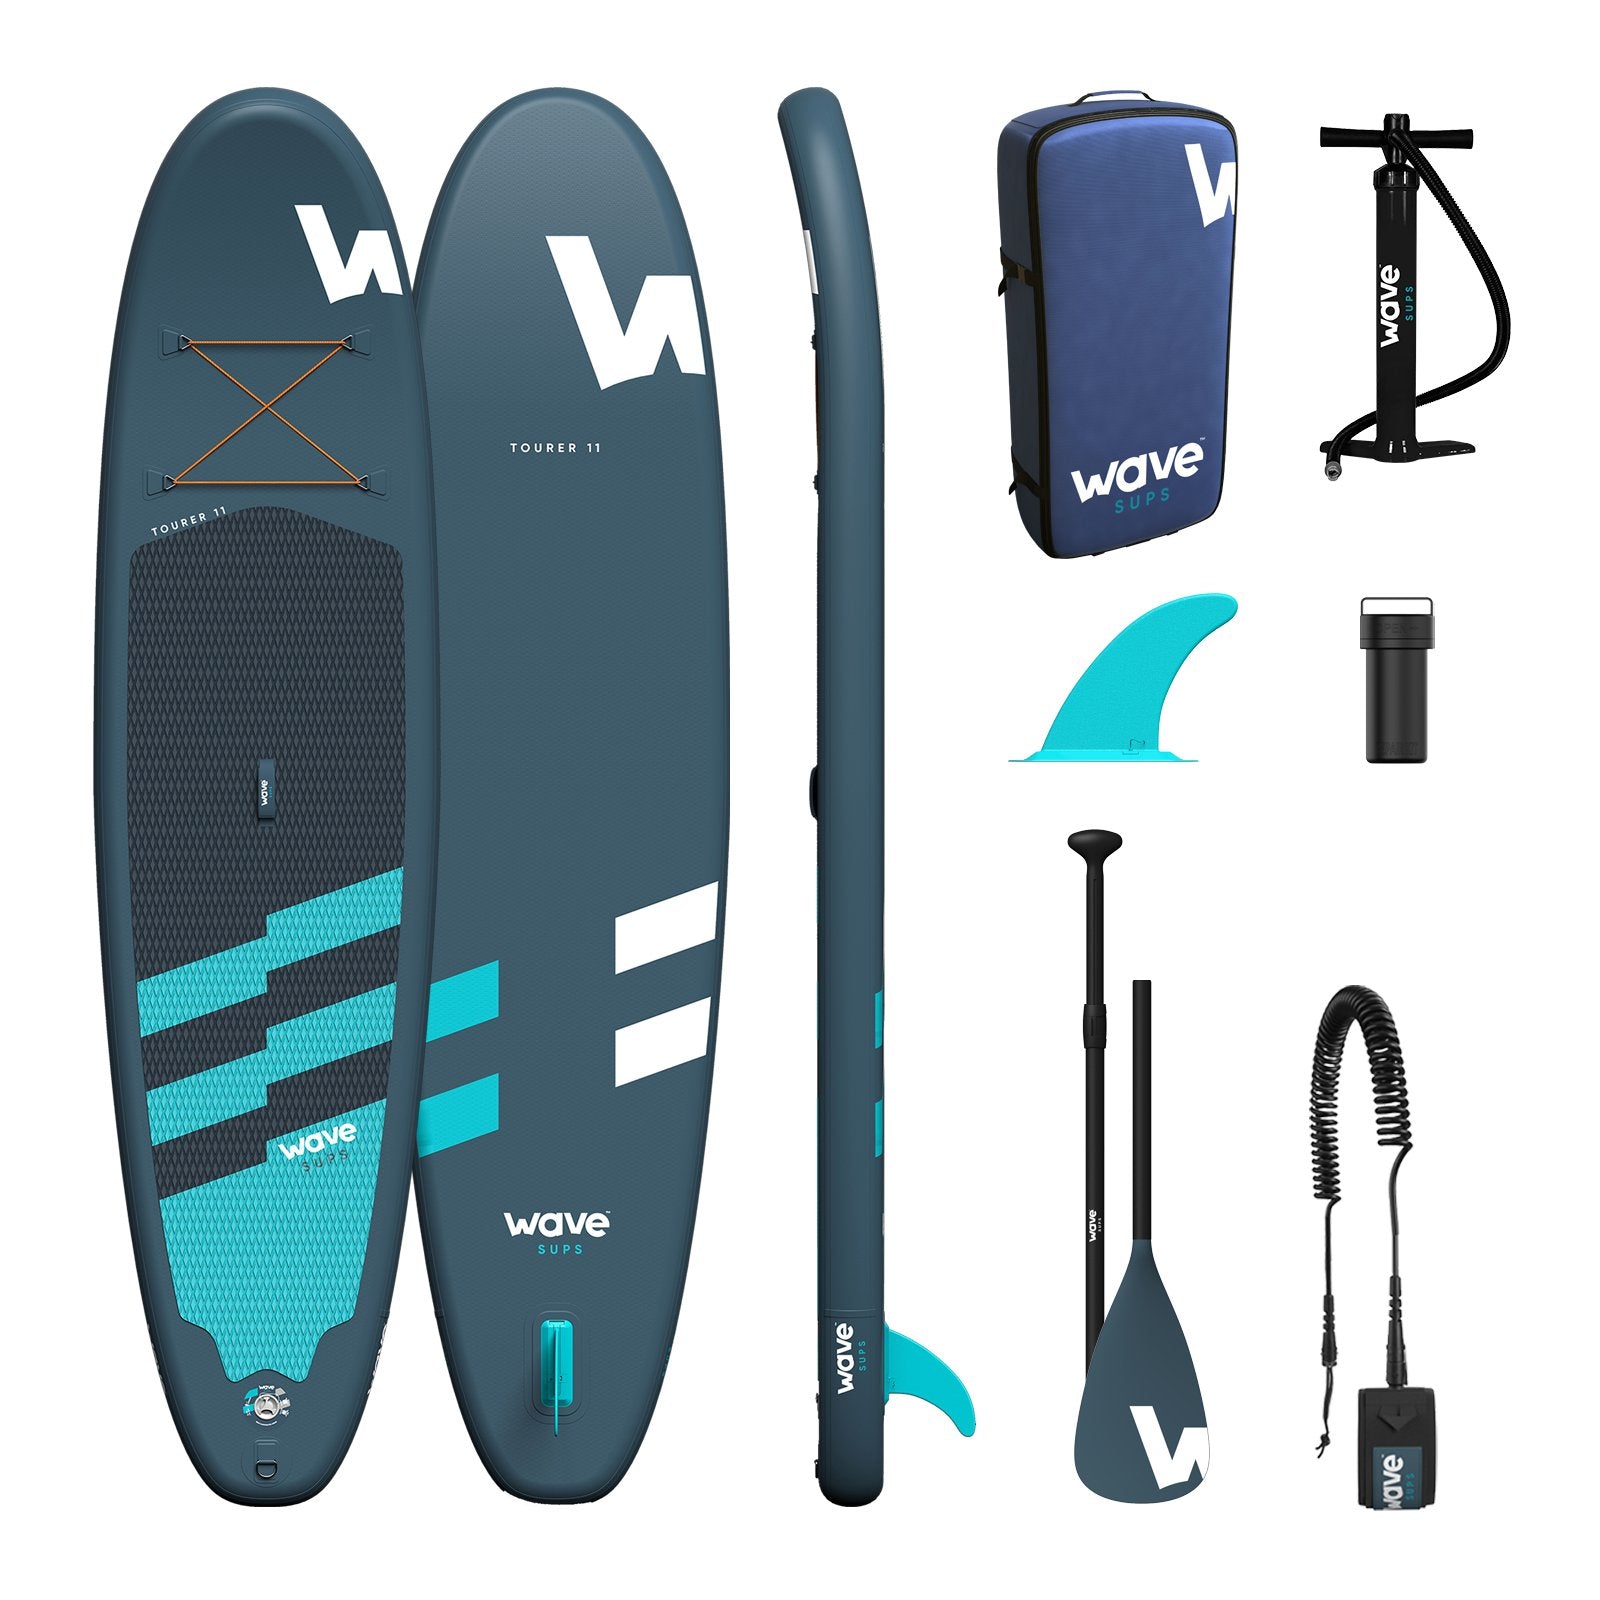 Tourer SUP | Inflatable Stand-Up Paddleboard | 10/11ft | Navy - Wave Sups EU